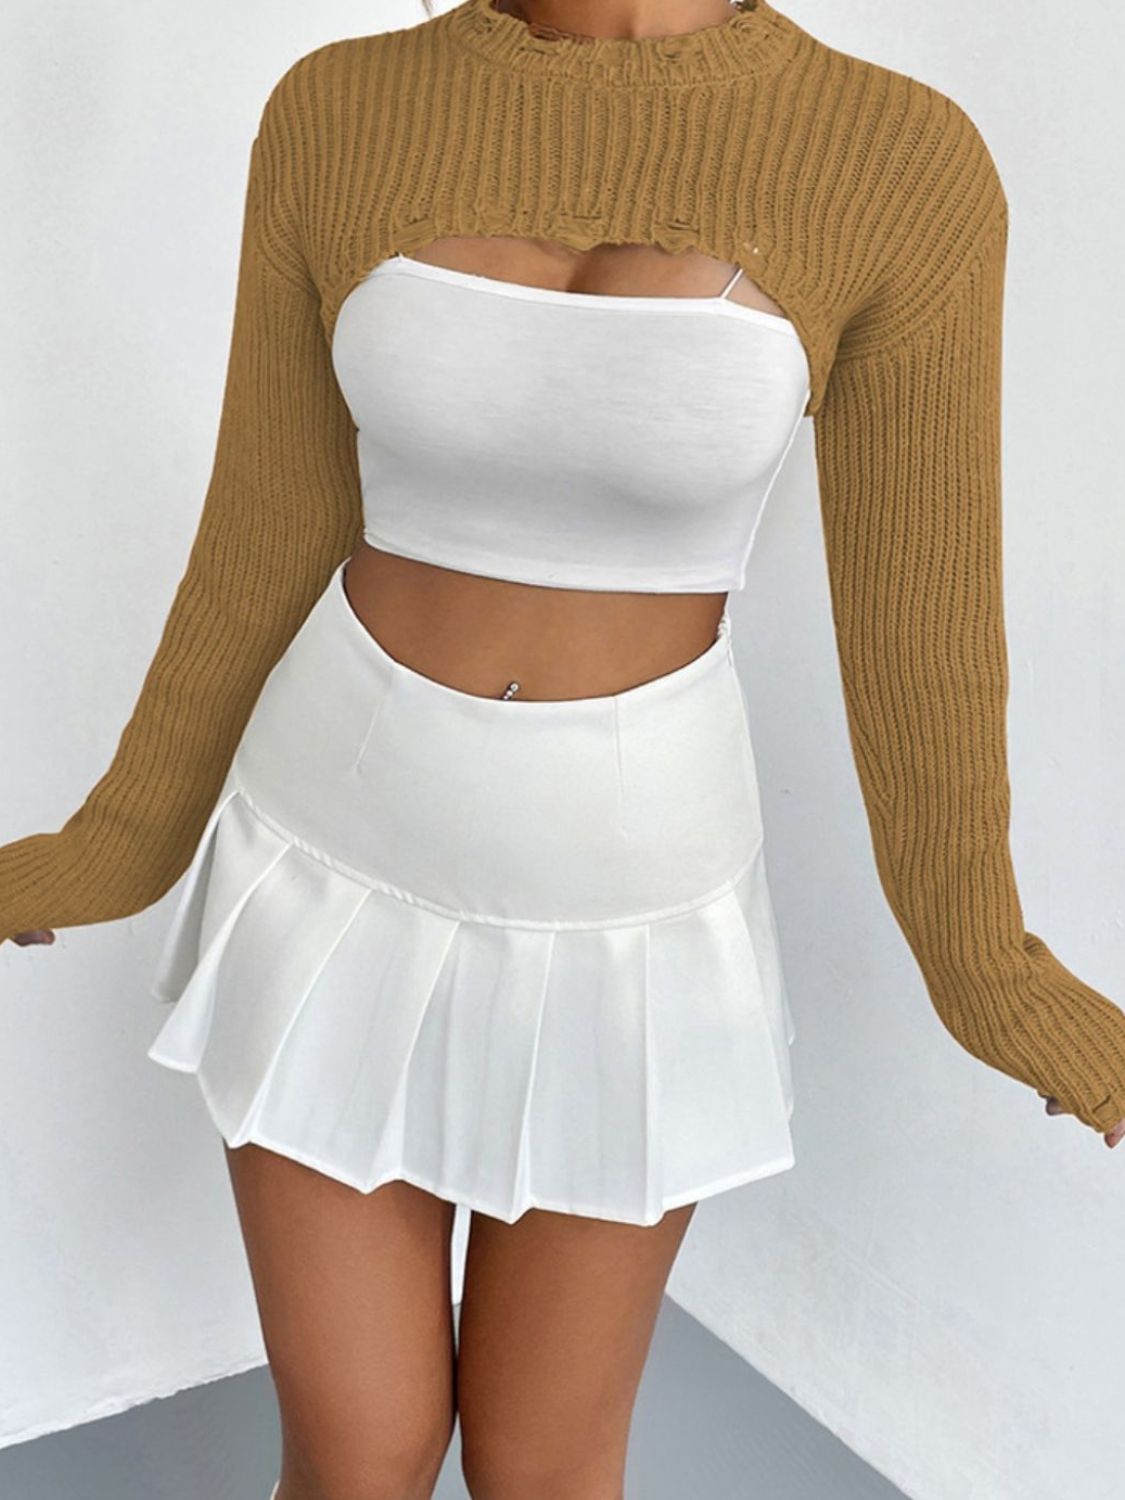 Distressed Cropped Sweater